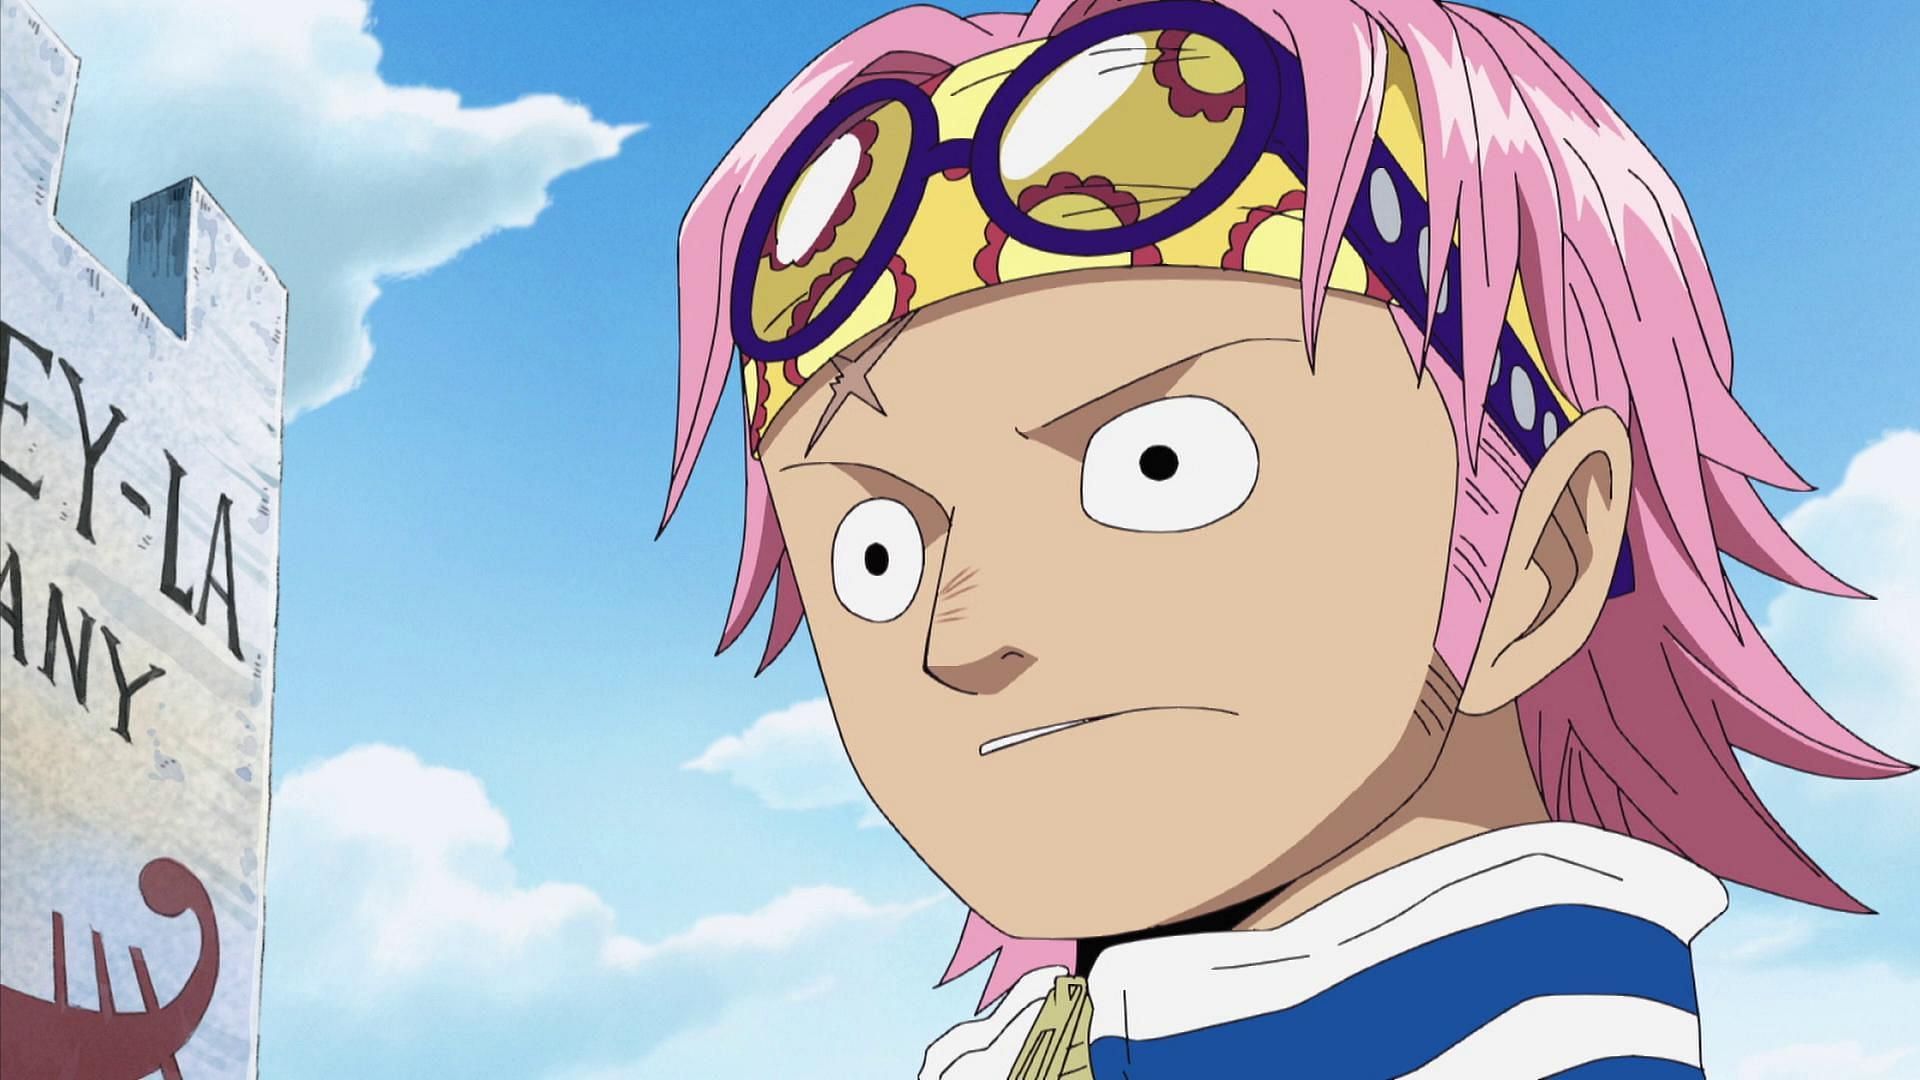 Koby as seen in Water Seven (Image via Toei Animation, One Piece)